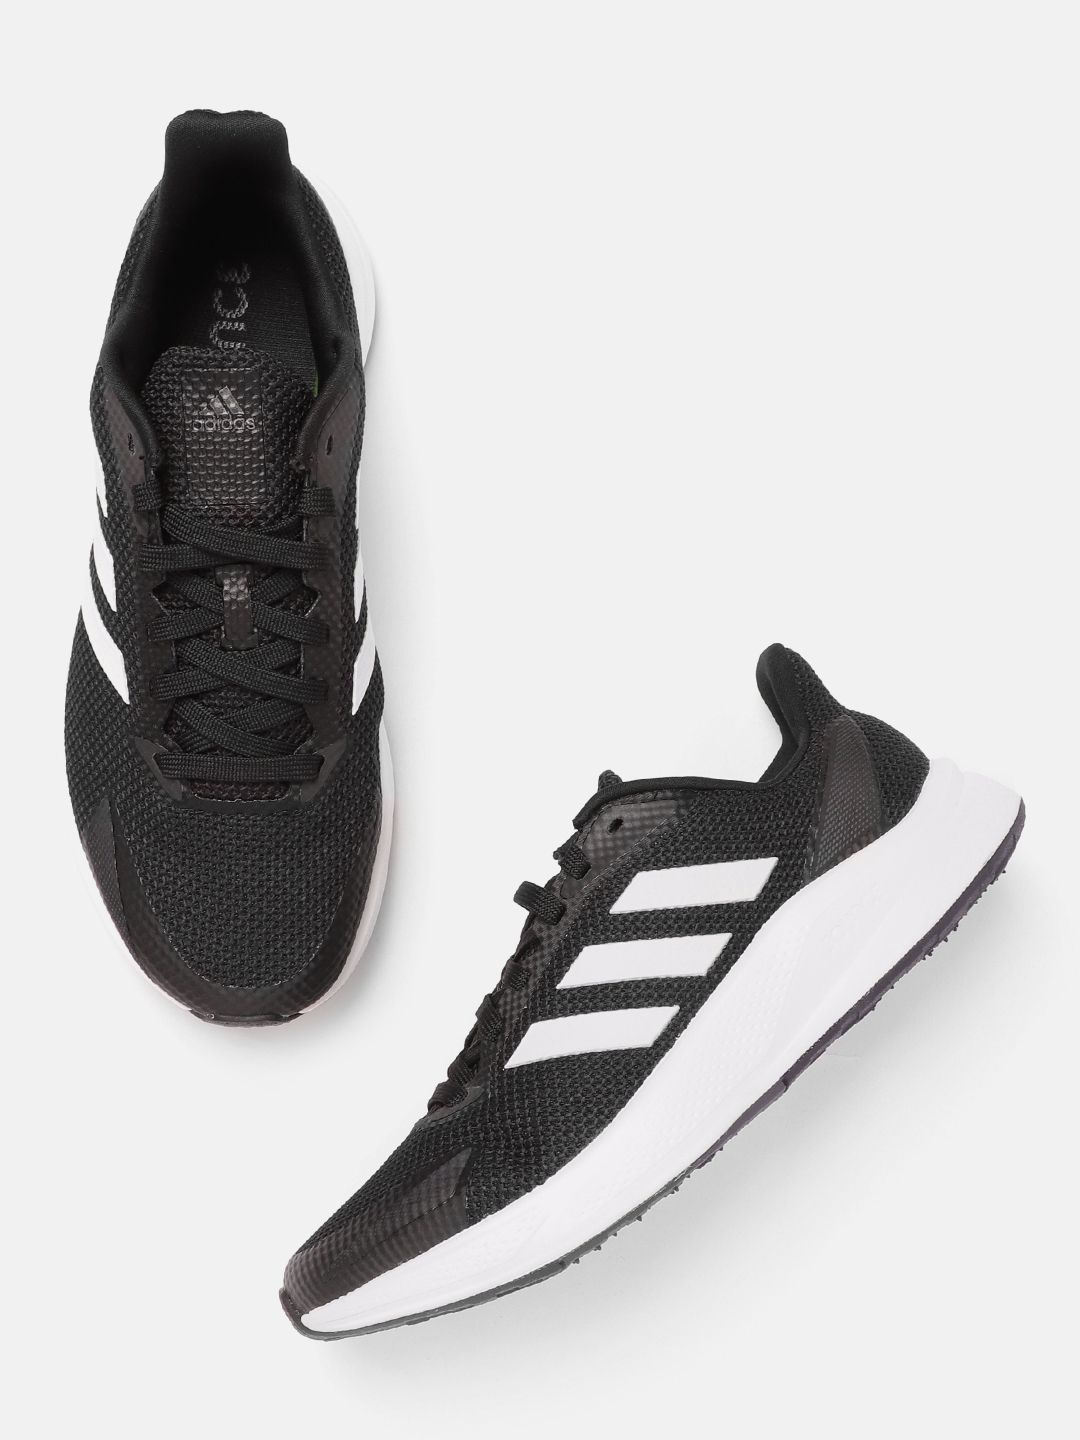 ADIDAS Women Black Woven Design X9000L1 Running Shoes Price in India